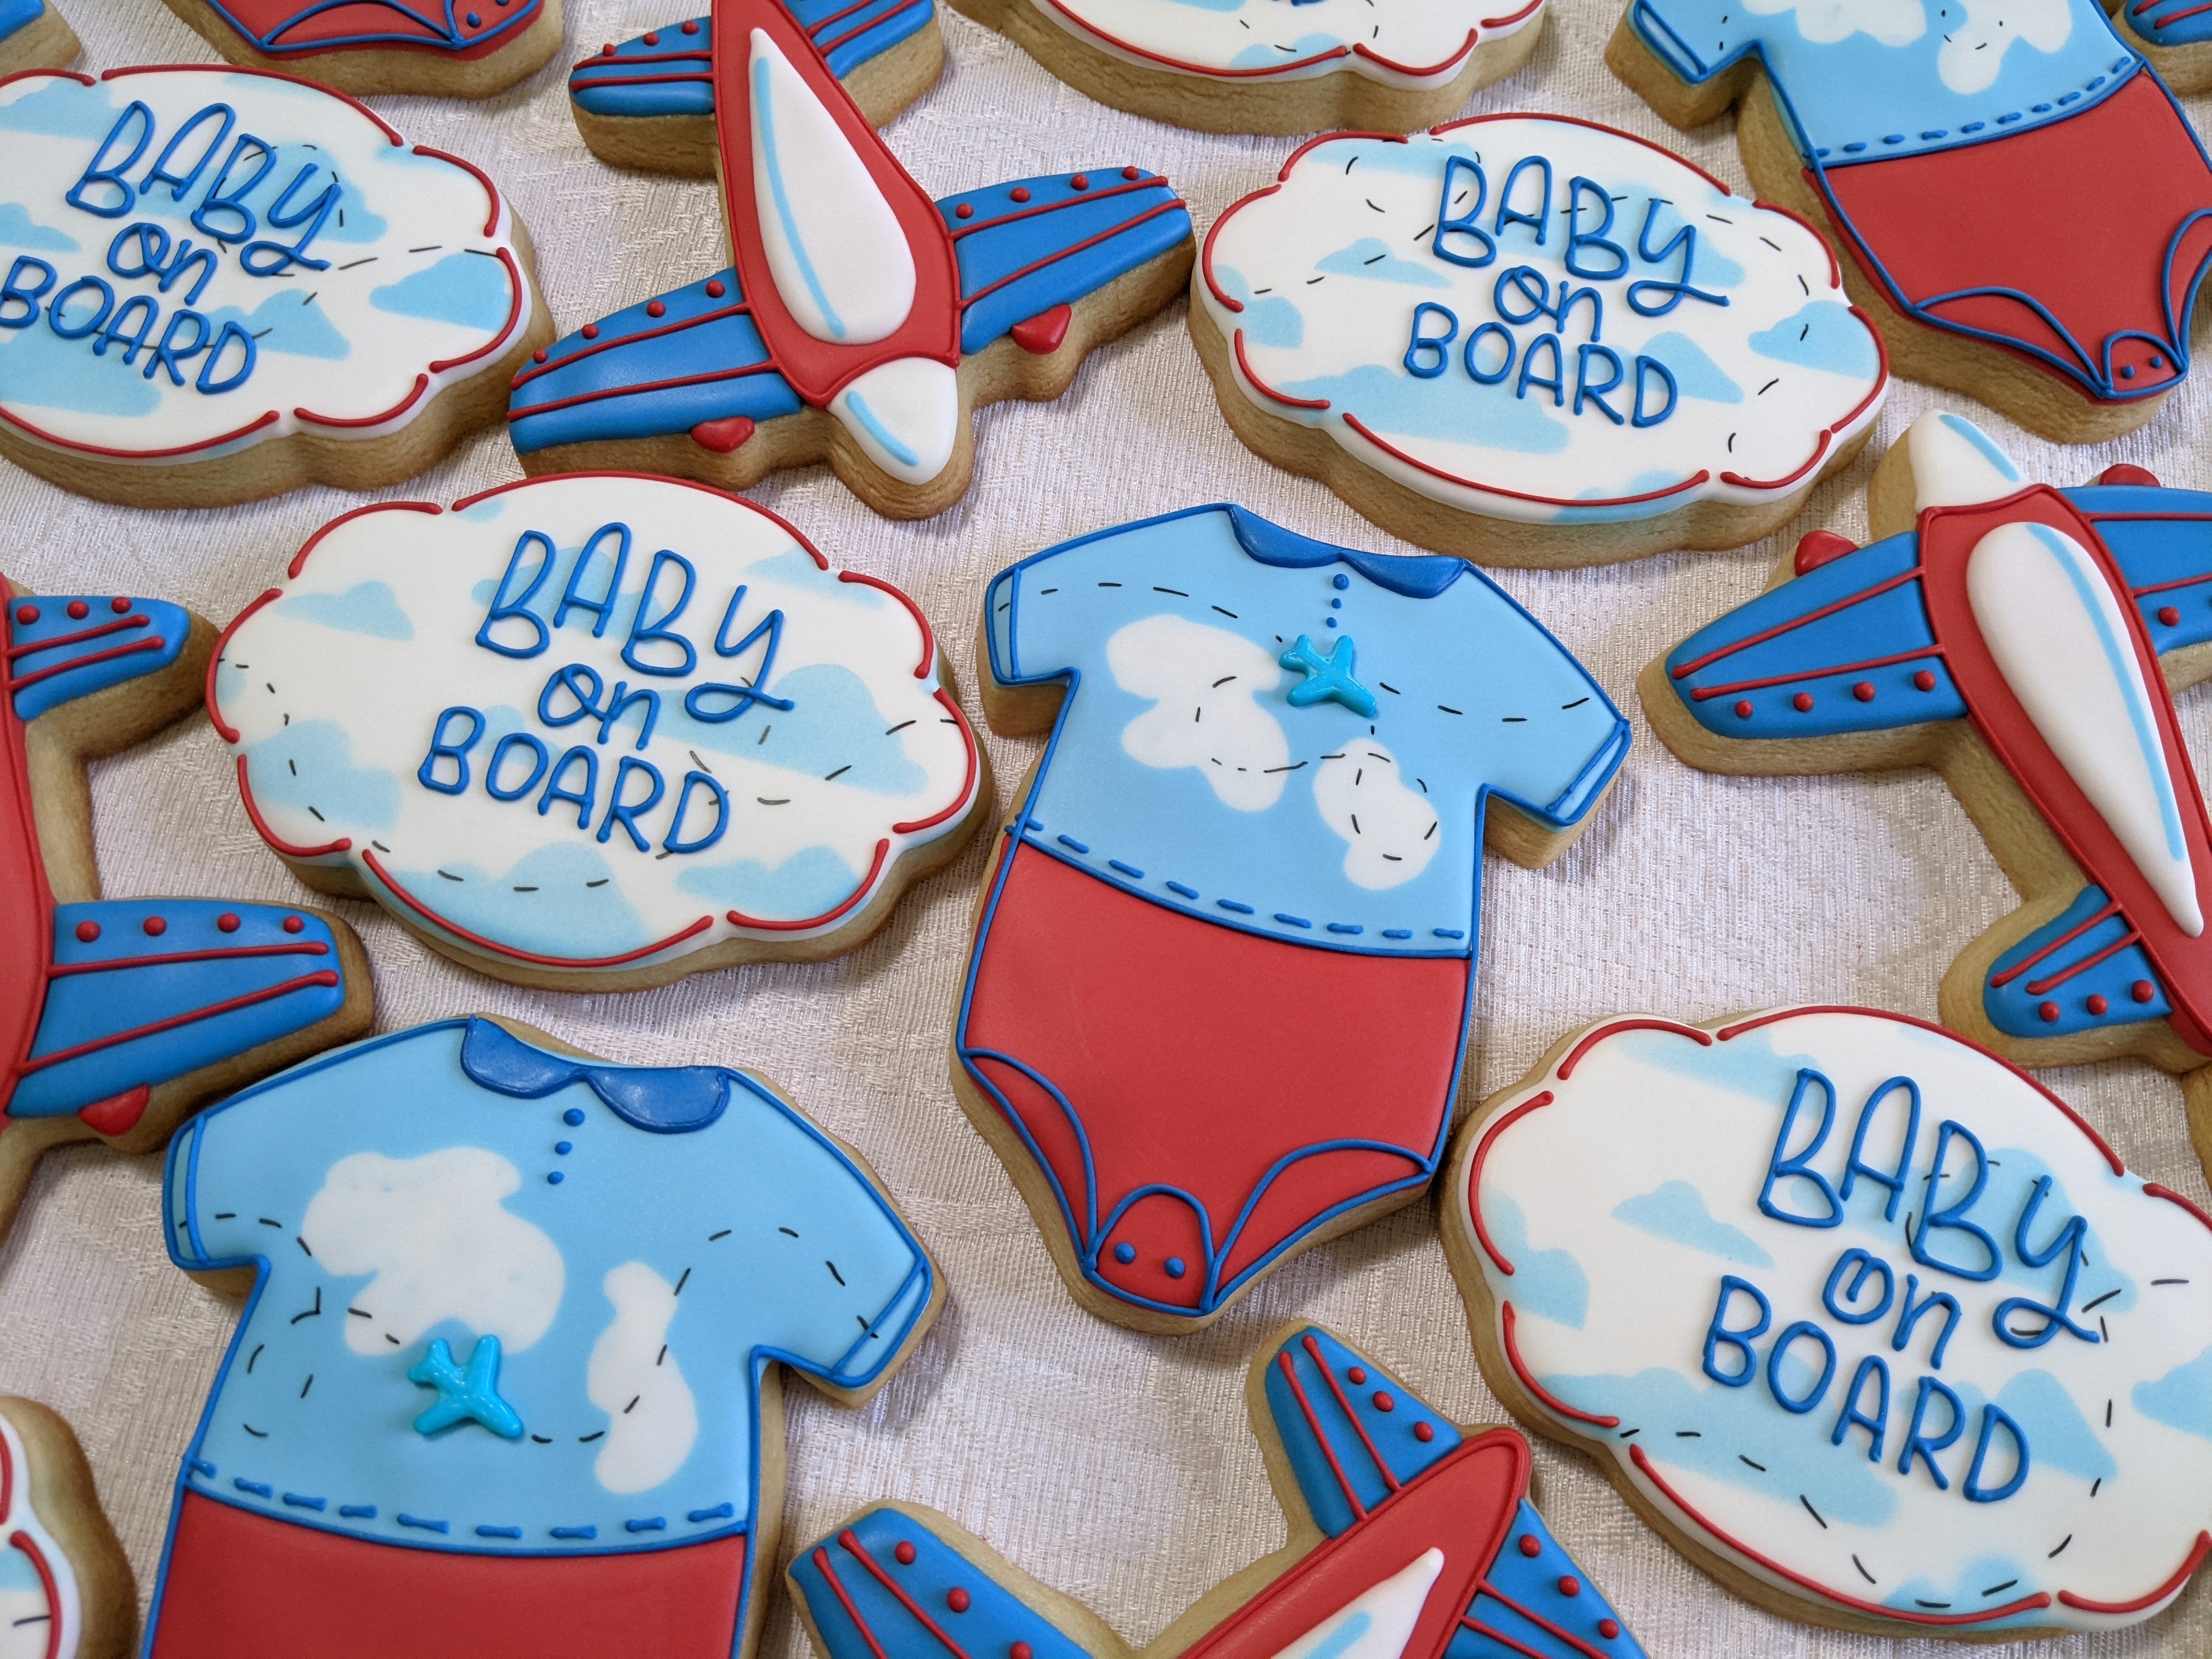 24 Baby on Board Message Baby Shower Sugar Cookies